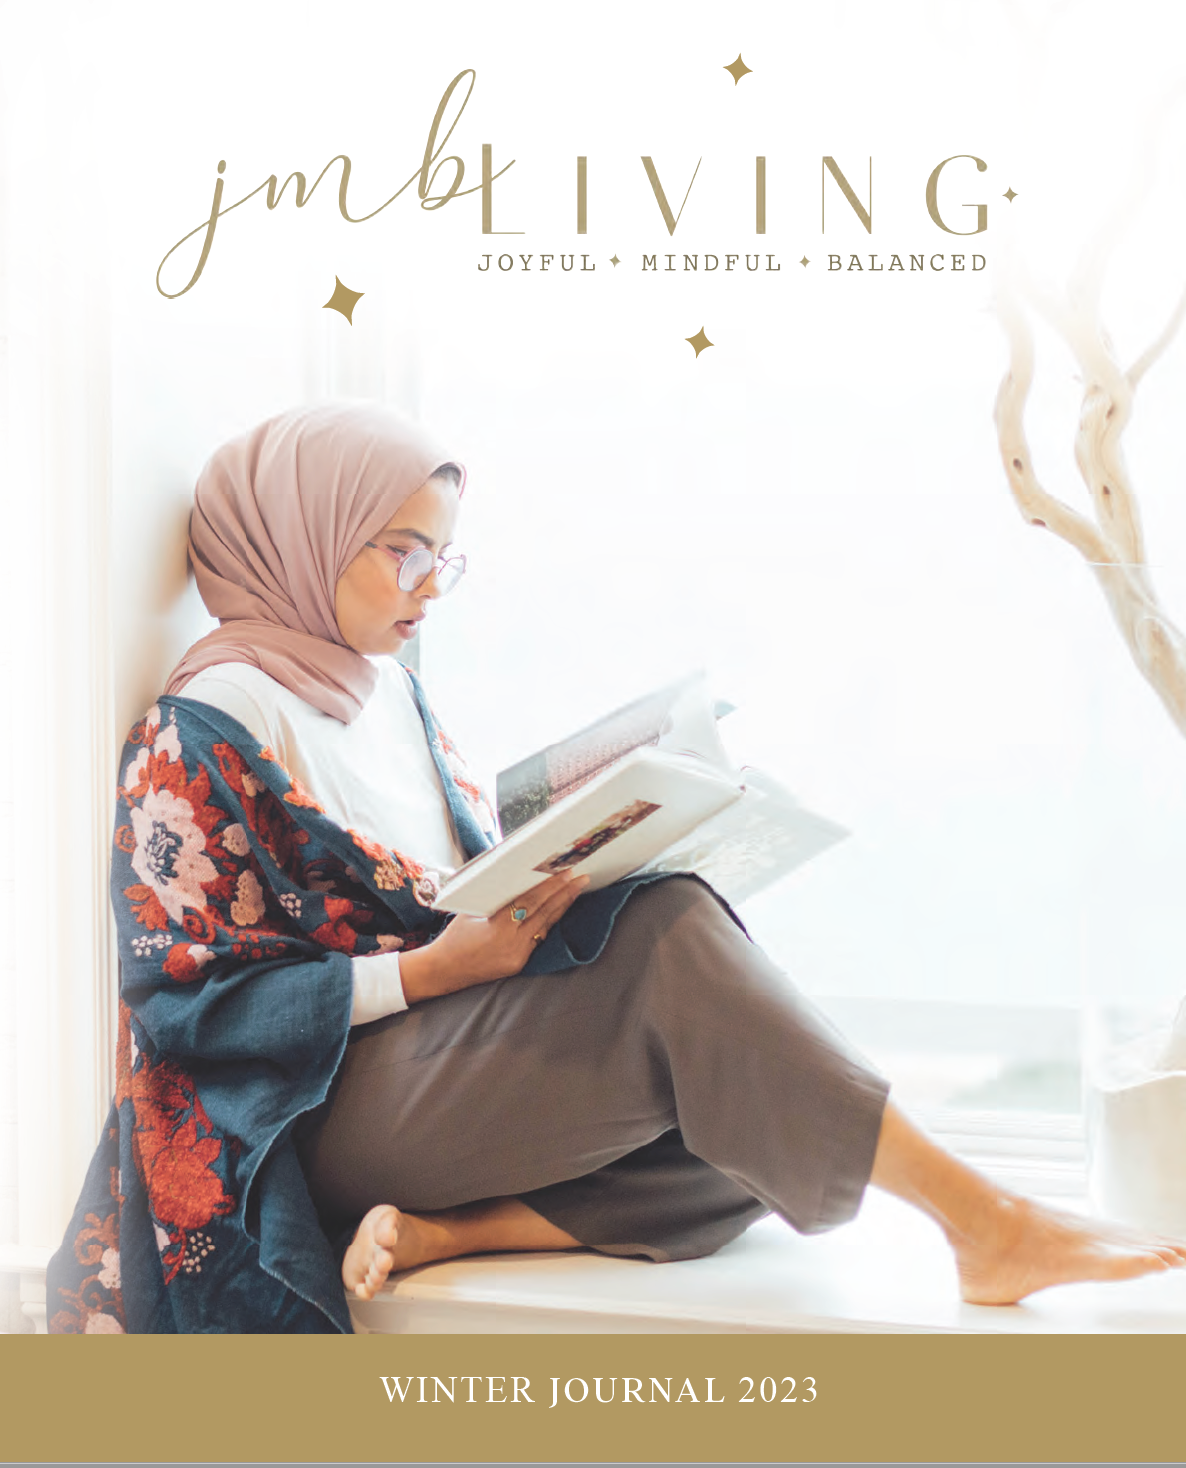 A New Journey for the JMB Living Journal